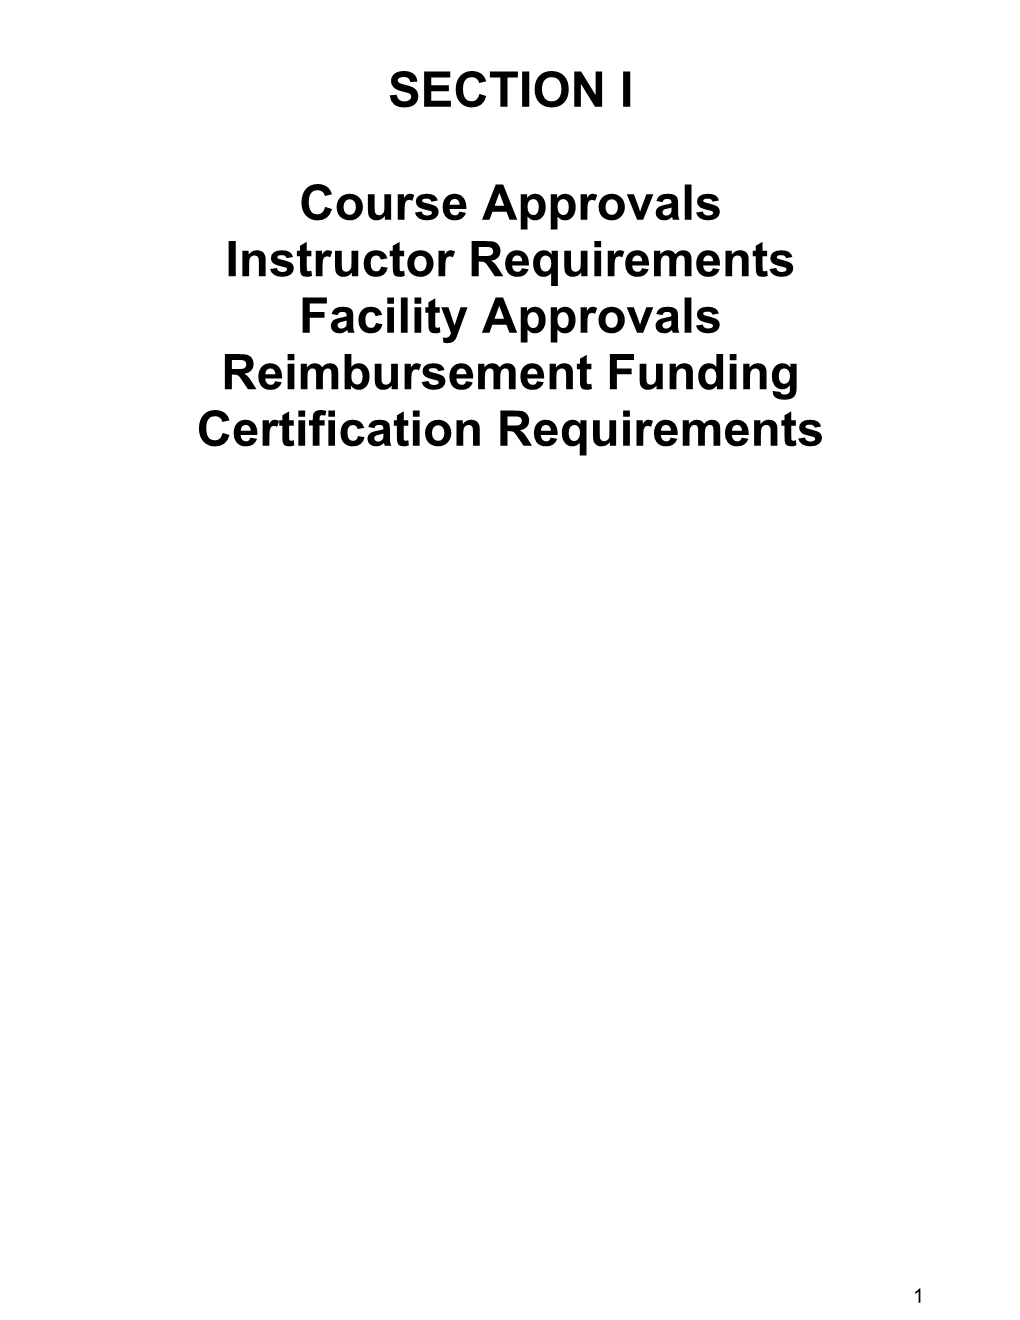 Course Approvals